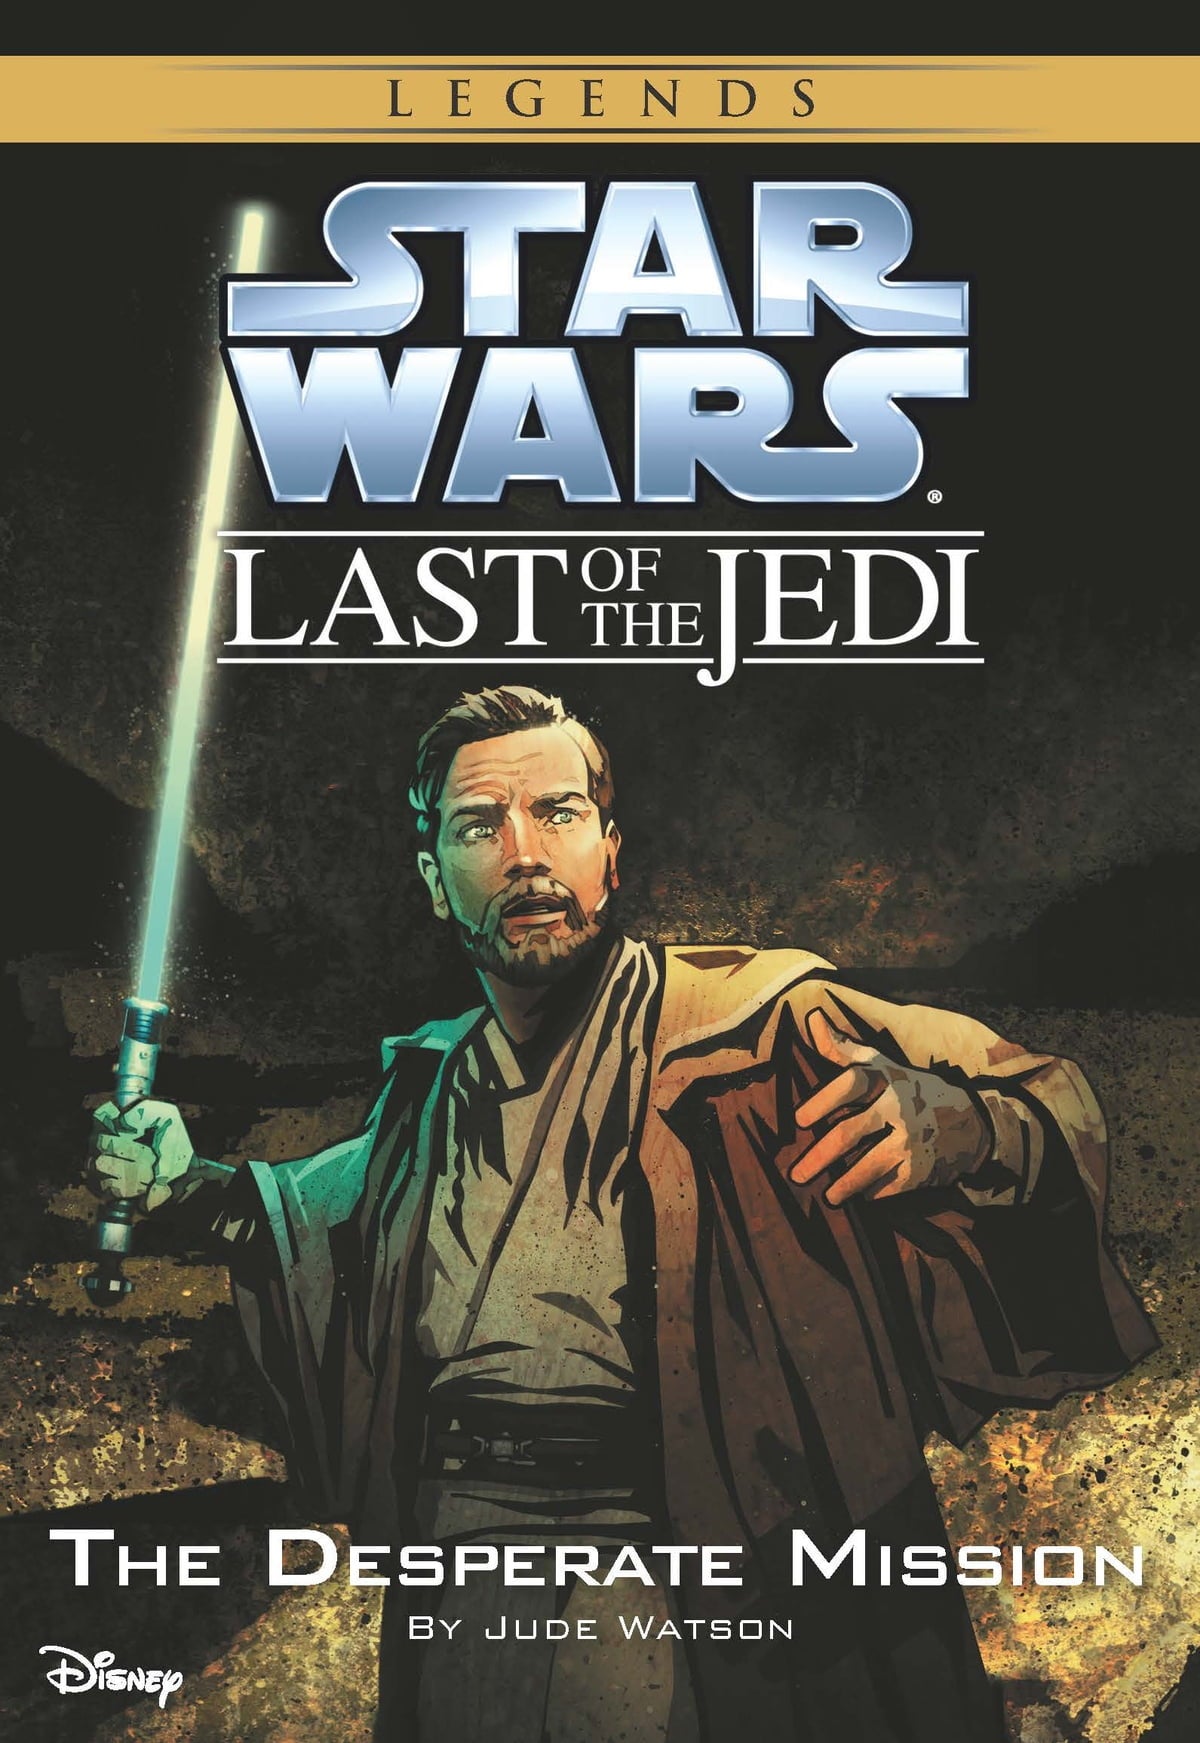 Cover of Last of the Jedi The Desperate Mission novel, featuring a depiction of Ewan McGregor wielding a lightsaber